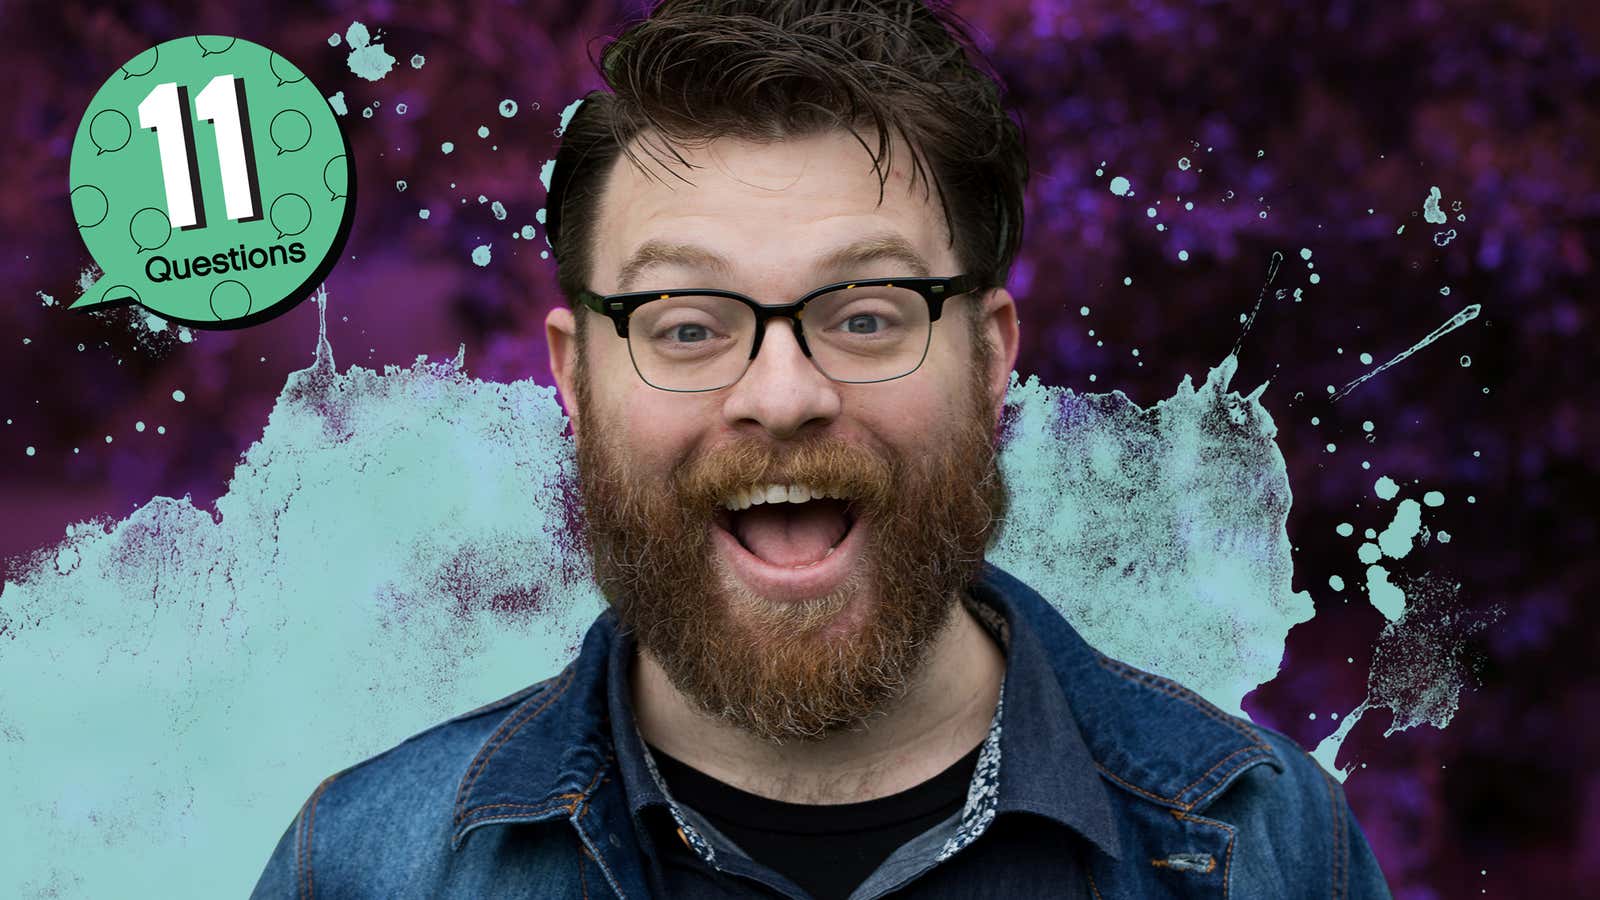 Travis McElroy is still hoping to find the moment we reached “peak Jim Carrey”